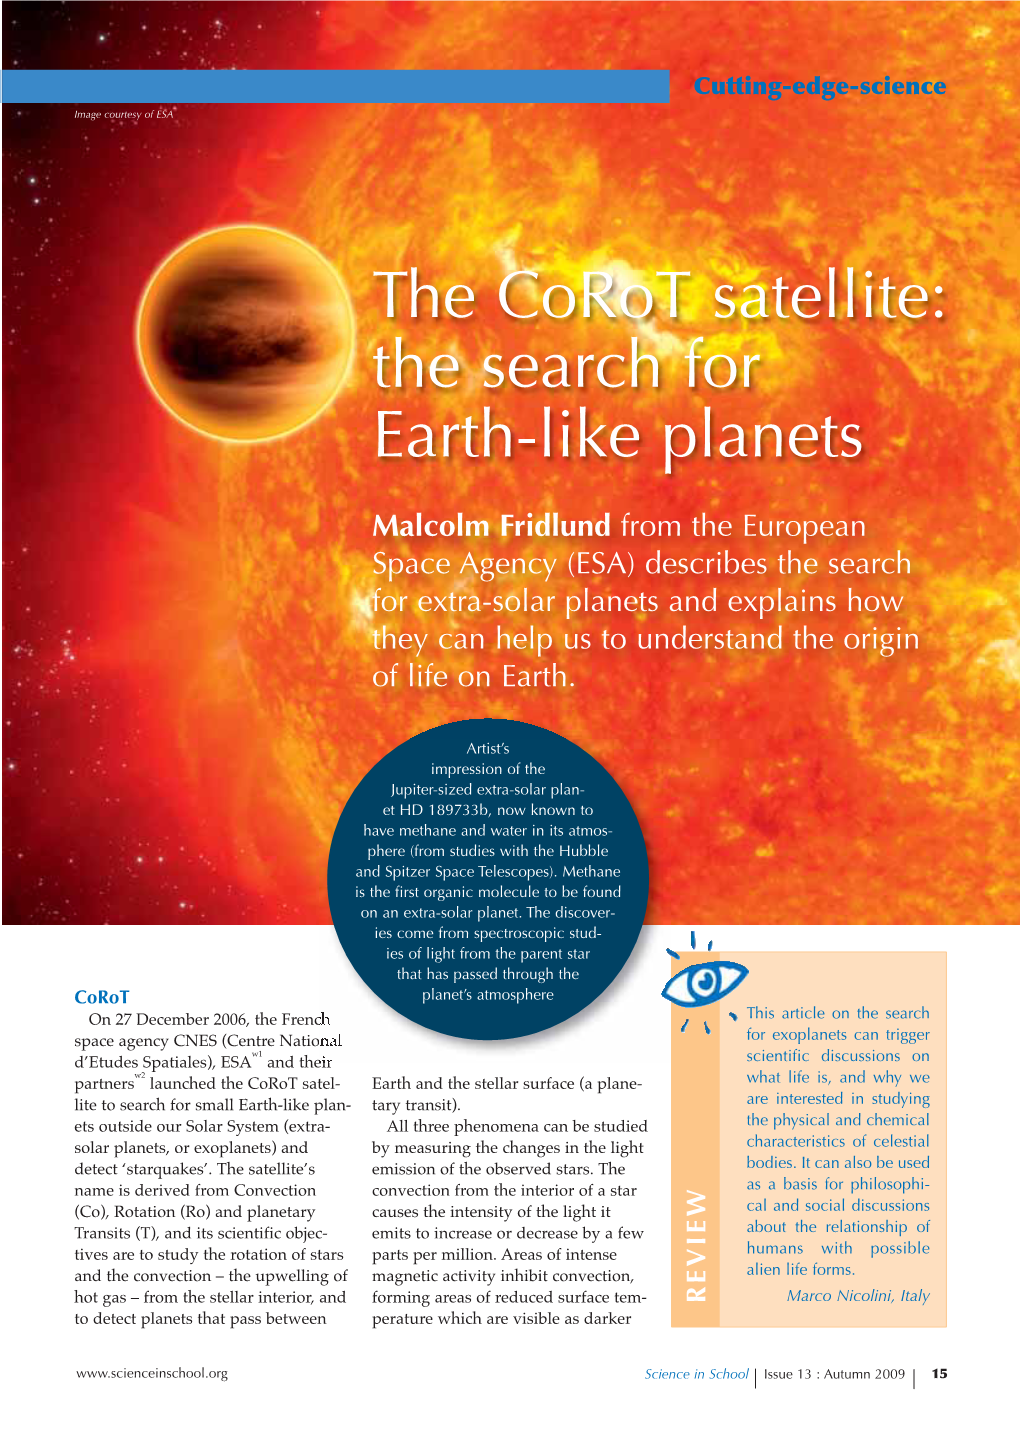 The Corot Satellite: the Search for Earth-Like Planets